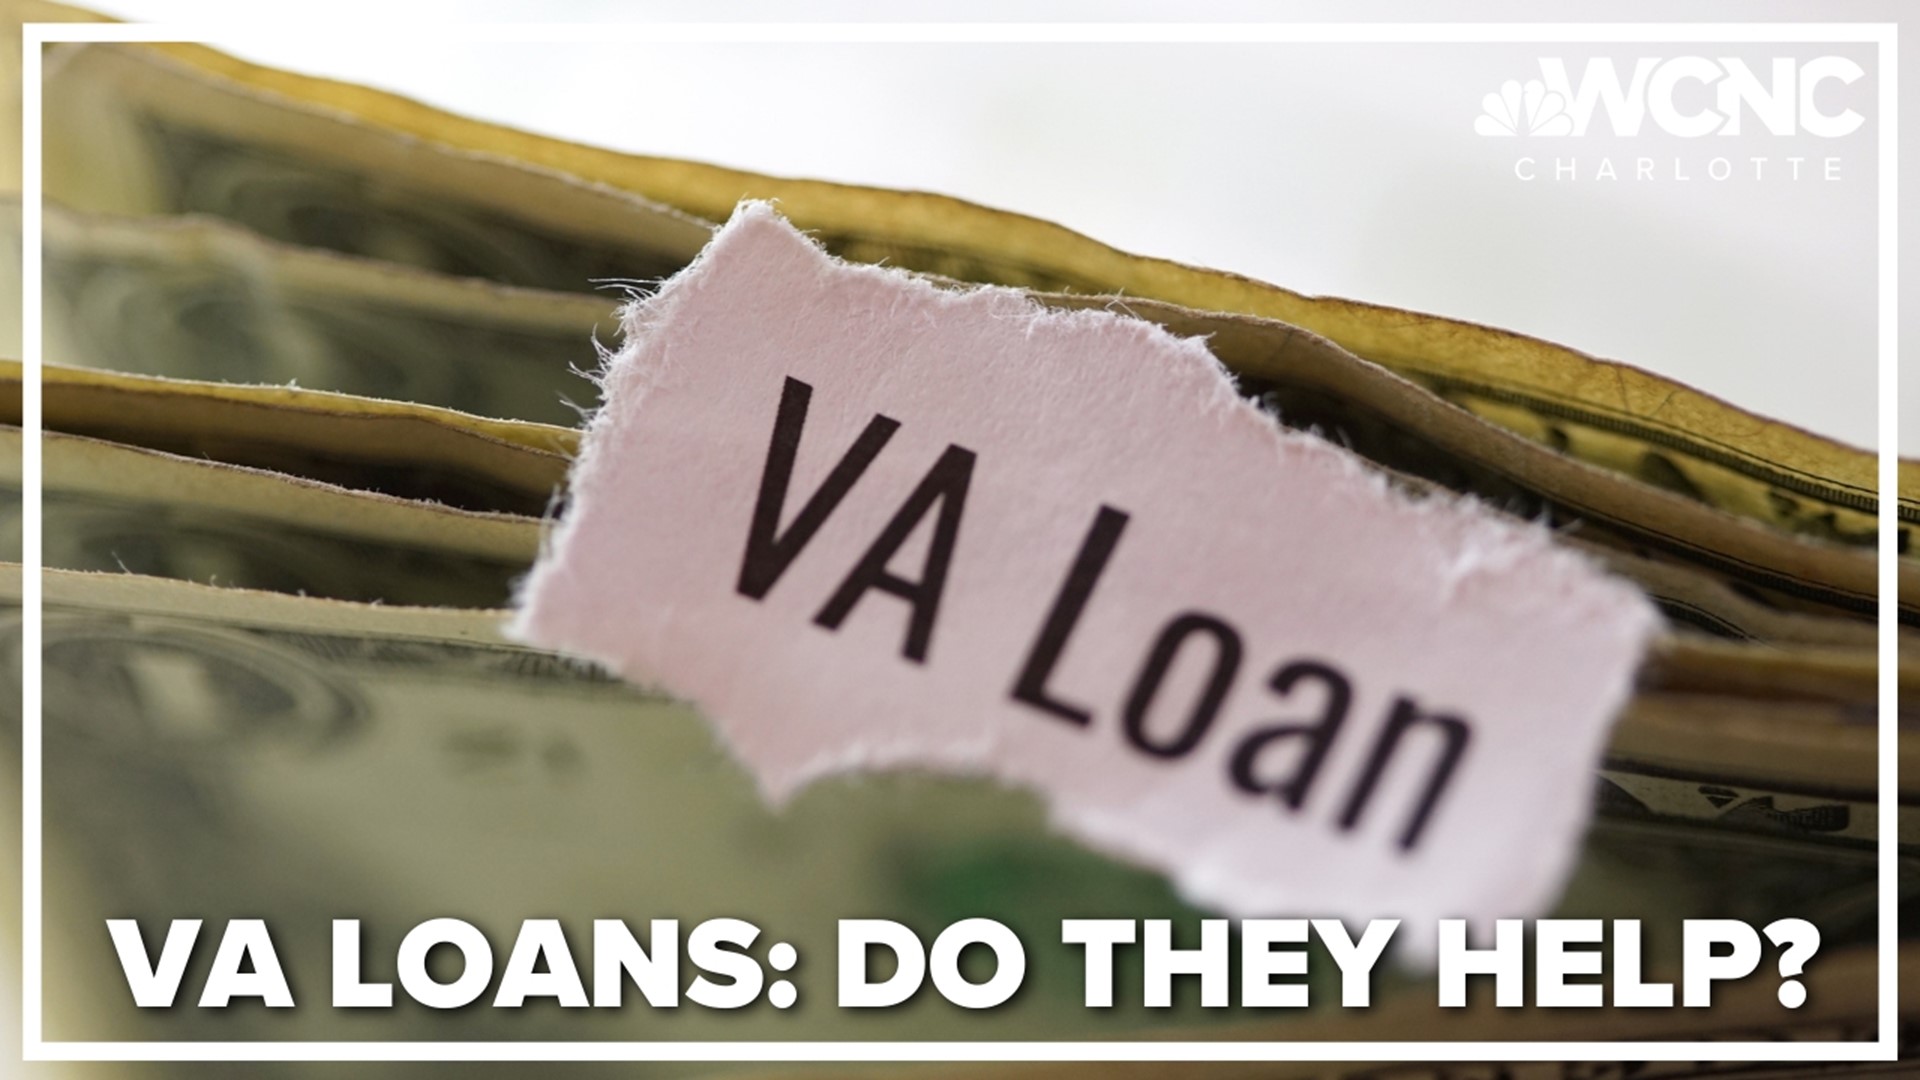 Misconceptions about the VA loan program are creating extra challenges for service members who are looking to own a home.